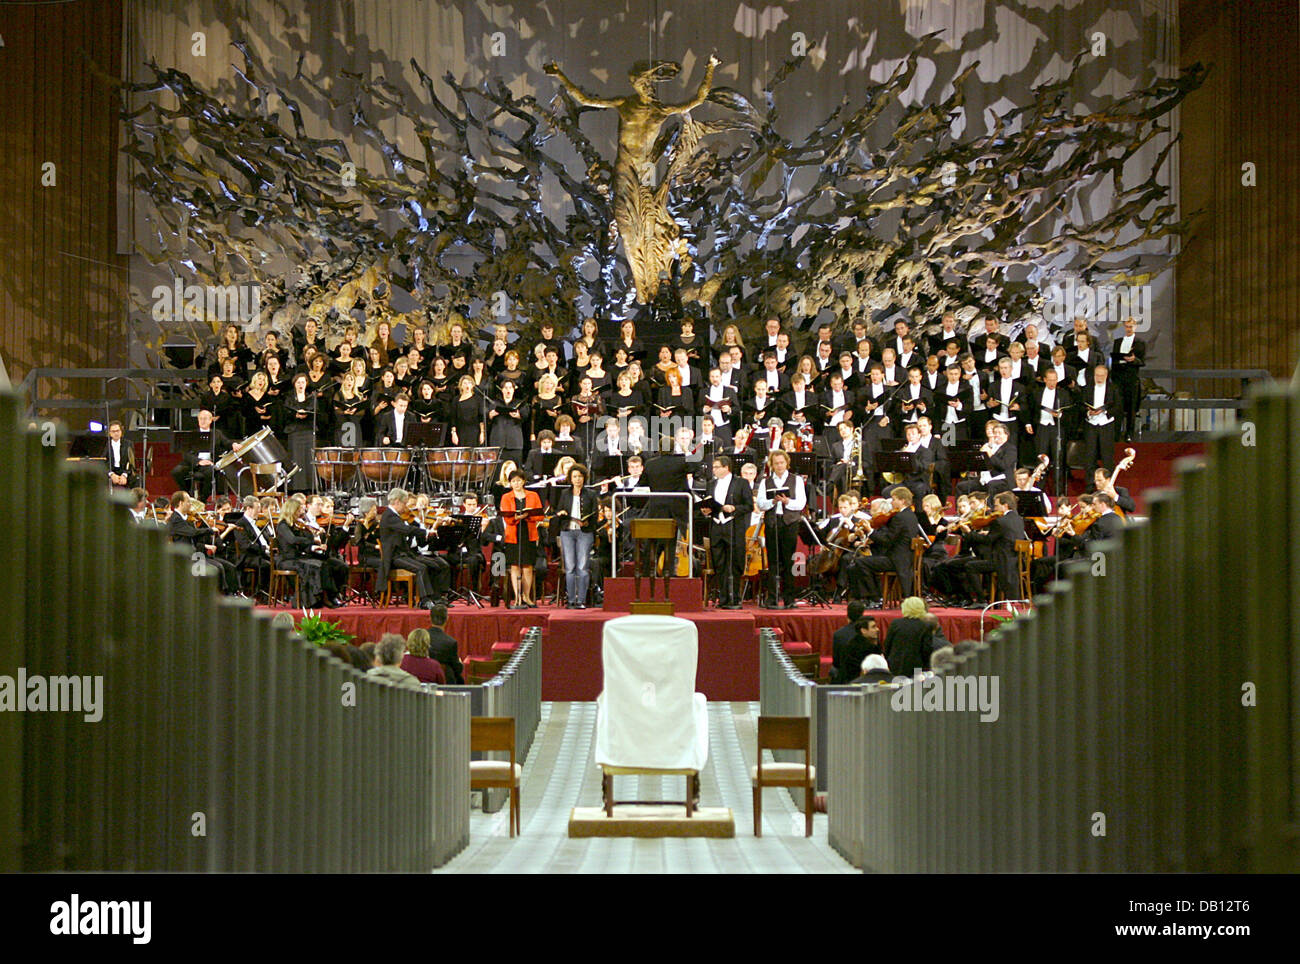 The Symphonic Orchestra of the Bavarian Broadcast pictured during the dress rehearsal in the audience hall of Vatican City, Vatican City State, 27 October 2007. The concert of the Symphonic Orchestra of the Bavarian Broadcast later the eveining is attended also by the pontiff. The concert with Beethoven?s 9th Symphony and - on the Pope?s request - the motet ?Tu es Petrus? by Palest Stock Photo